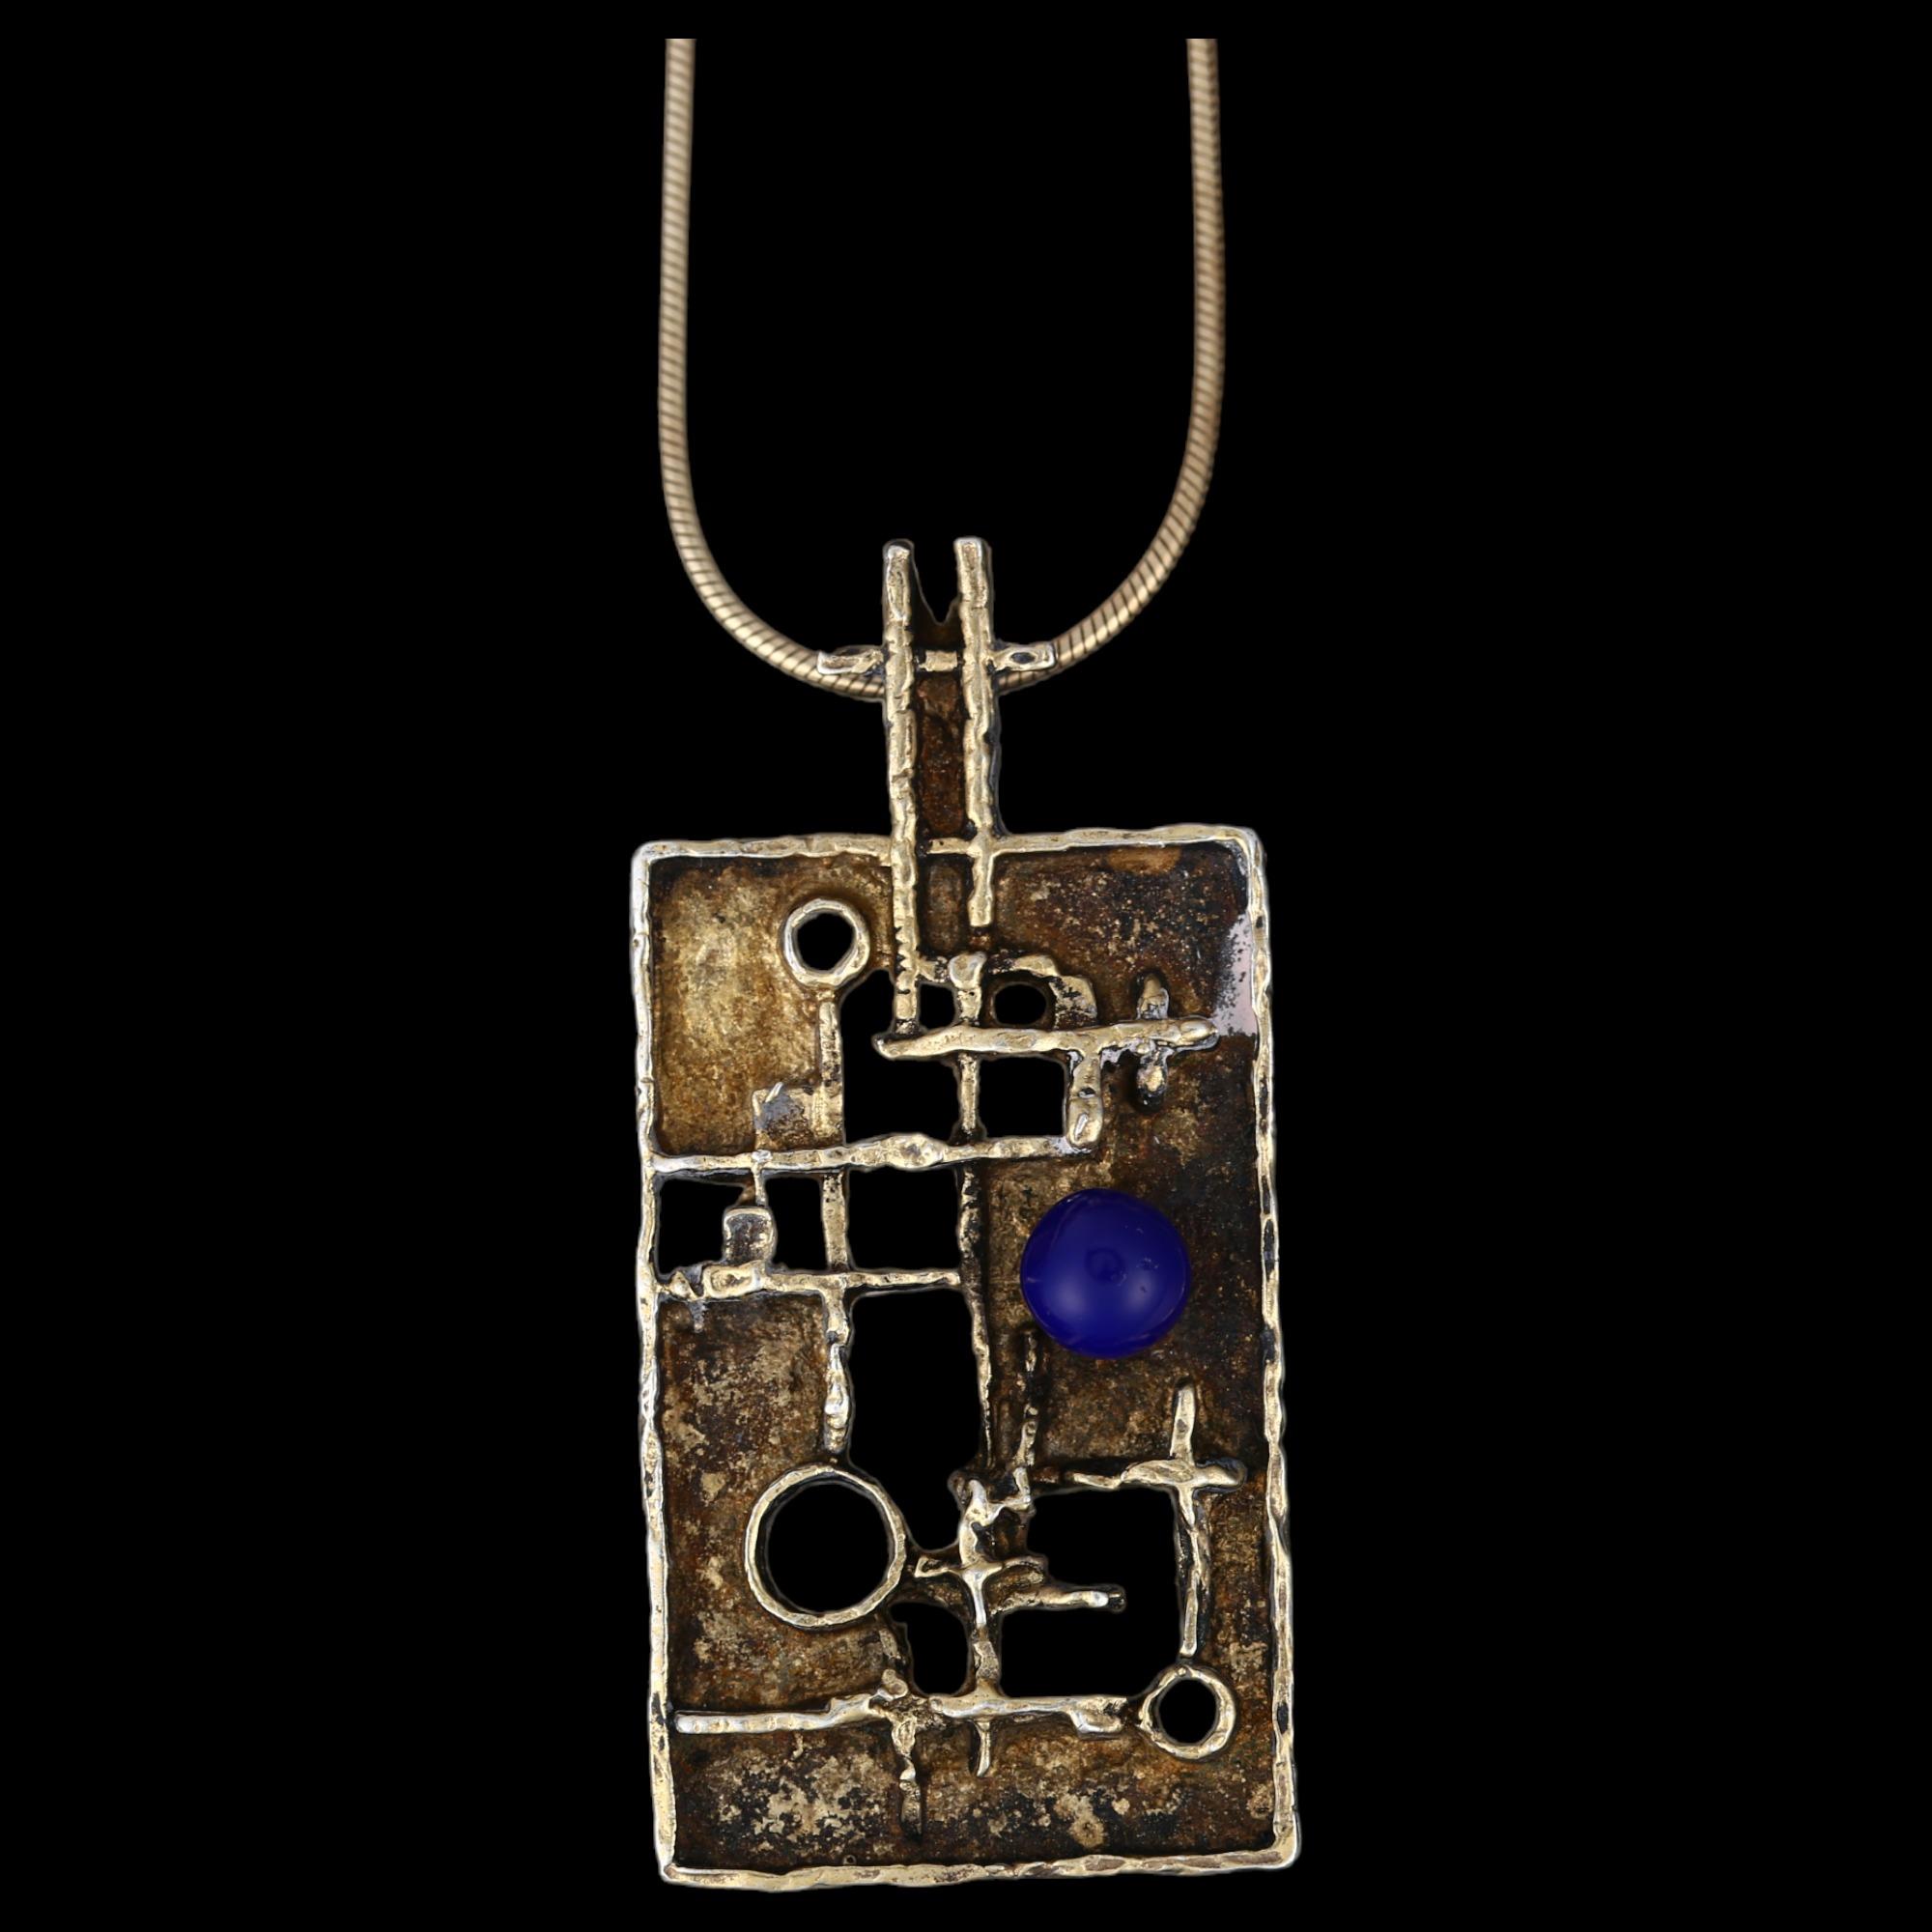 HERMANN SIERSBOL - a Danish brutalist gilded sterling silver and blue glass abstract pendant